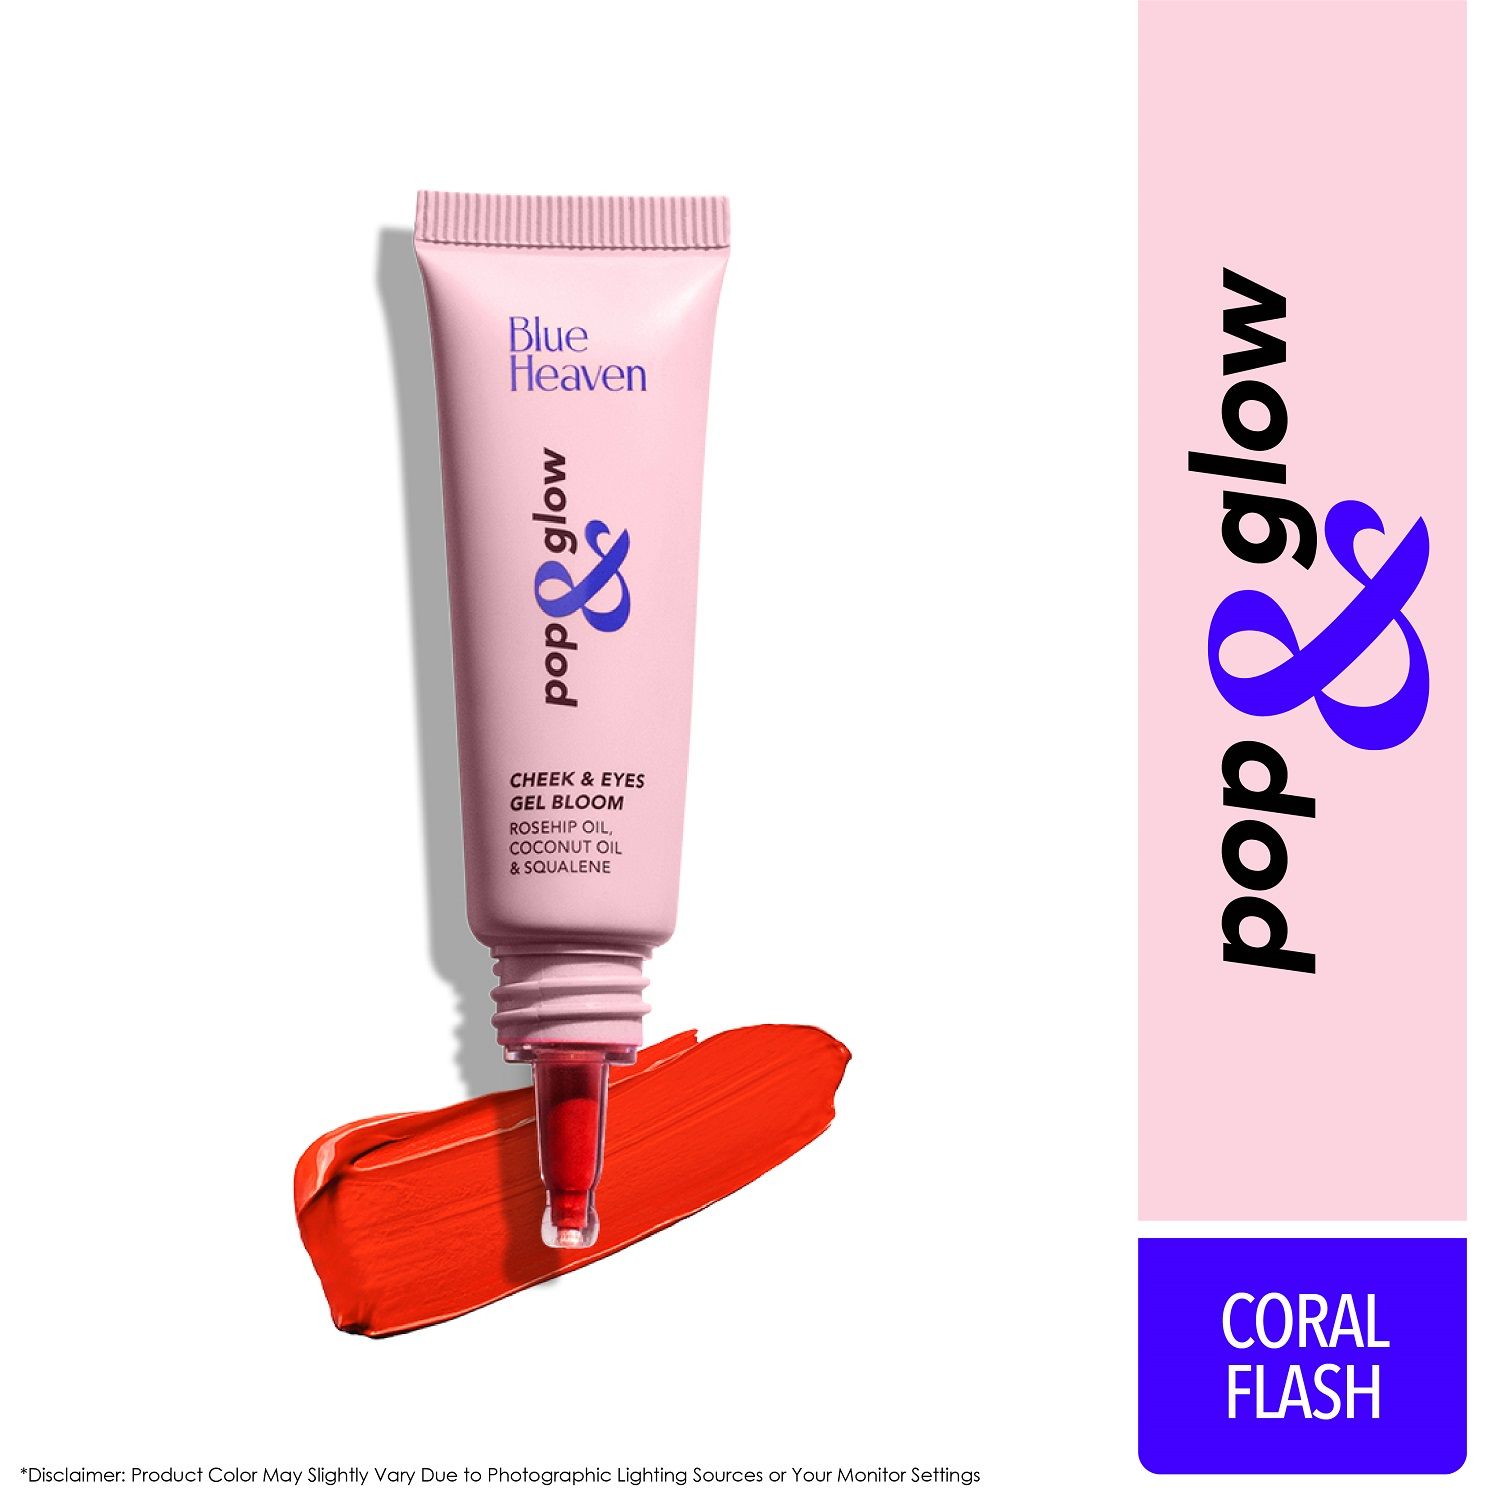 Buy Blue Heaven Pop & Glow Eye & Cheek tint blusher for face makeup, Blush enriched with Rosehip and Coconut oil - Coral Flash, 12ml - Purplle